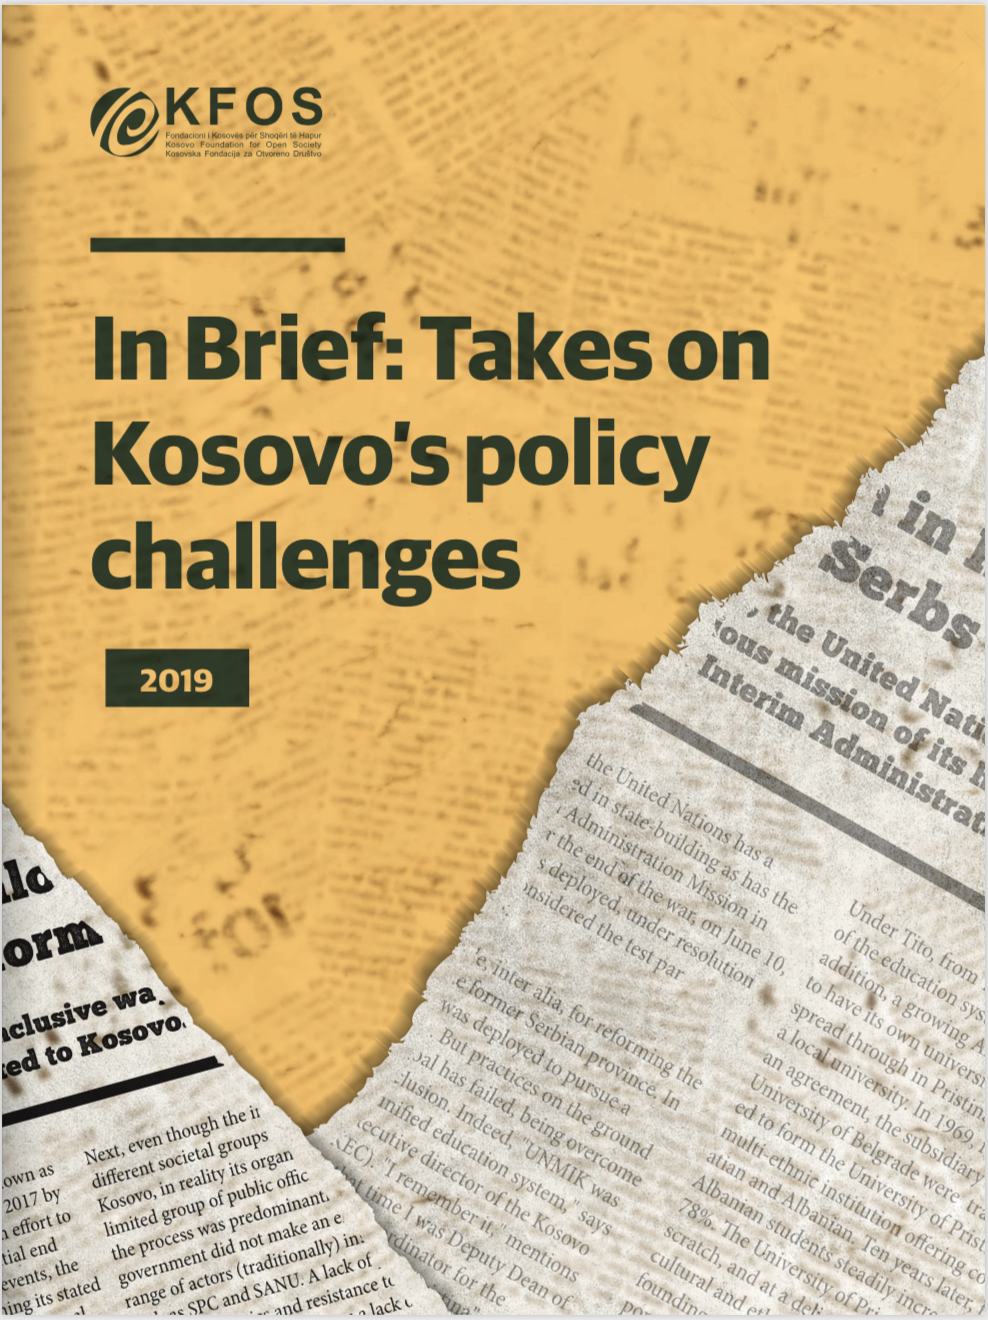 In brief: Takes on Kosovo's policy challenges 